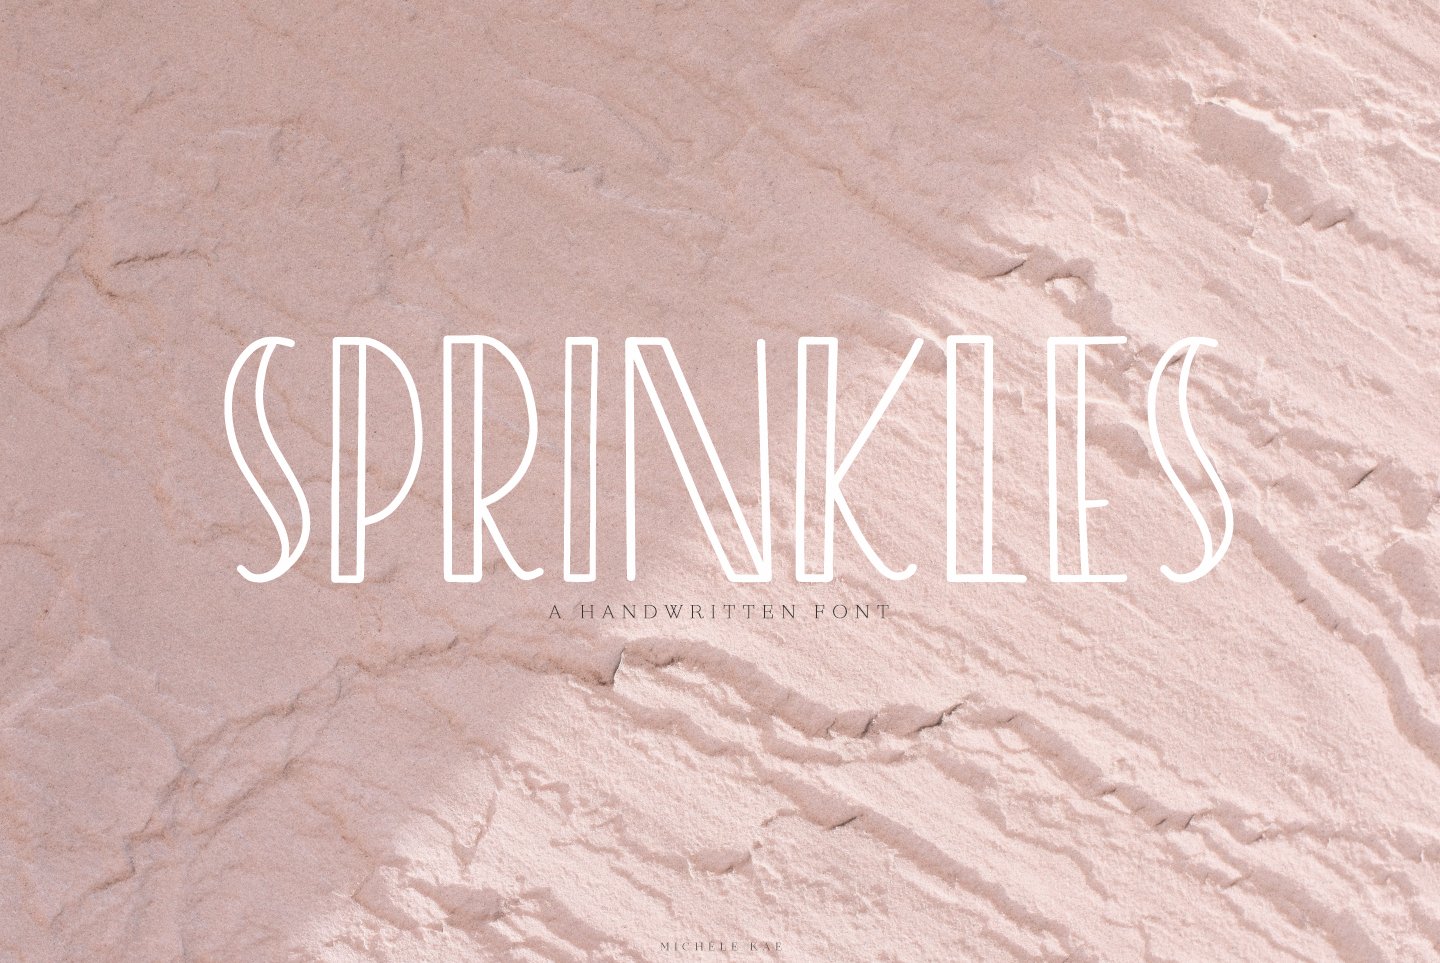 Sprinkles | A Sweet Playful Font cover image.